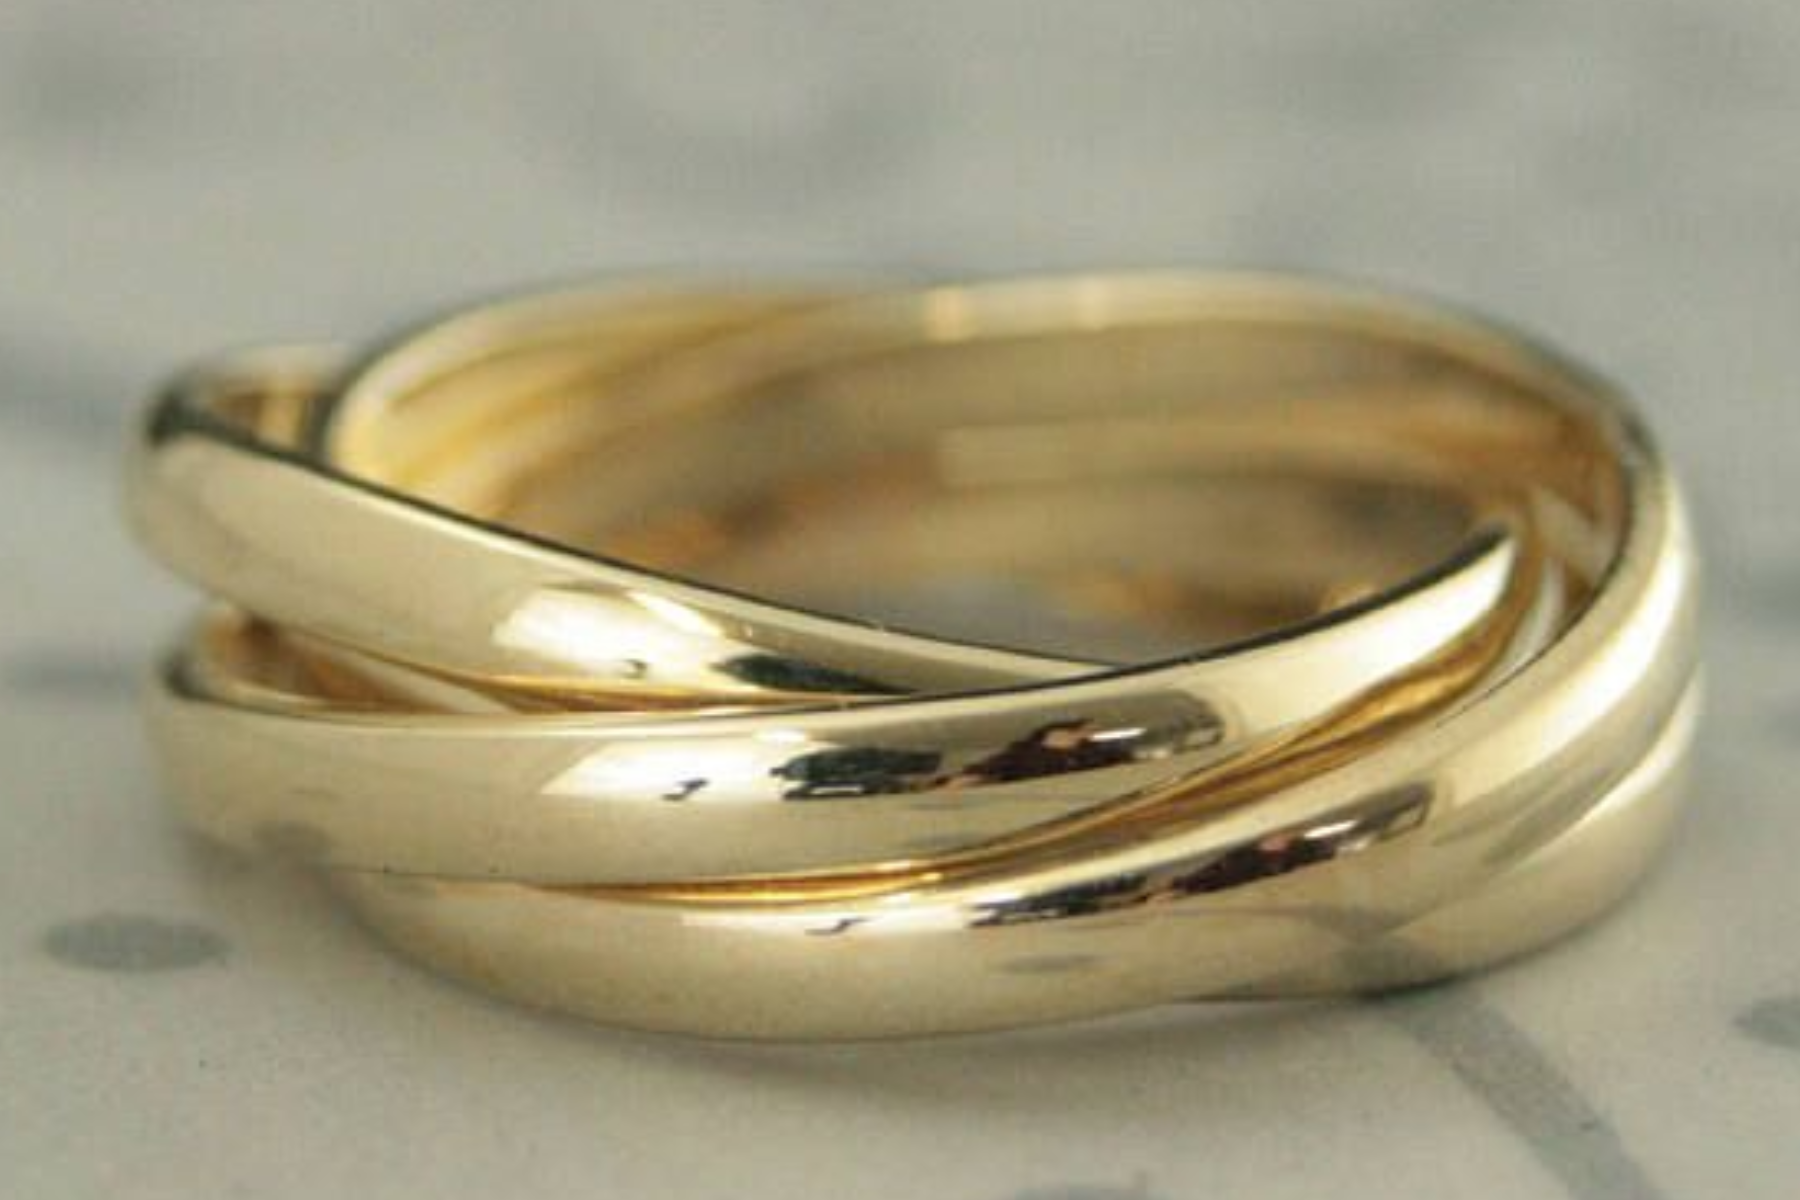 A gold ring with interlocking rings